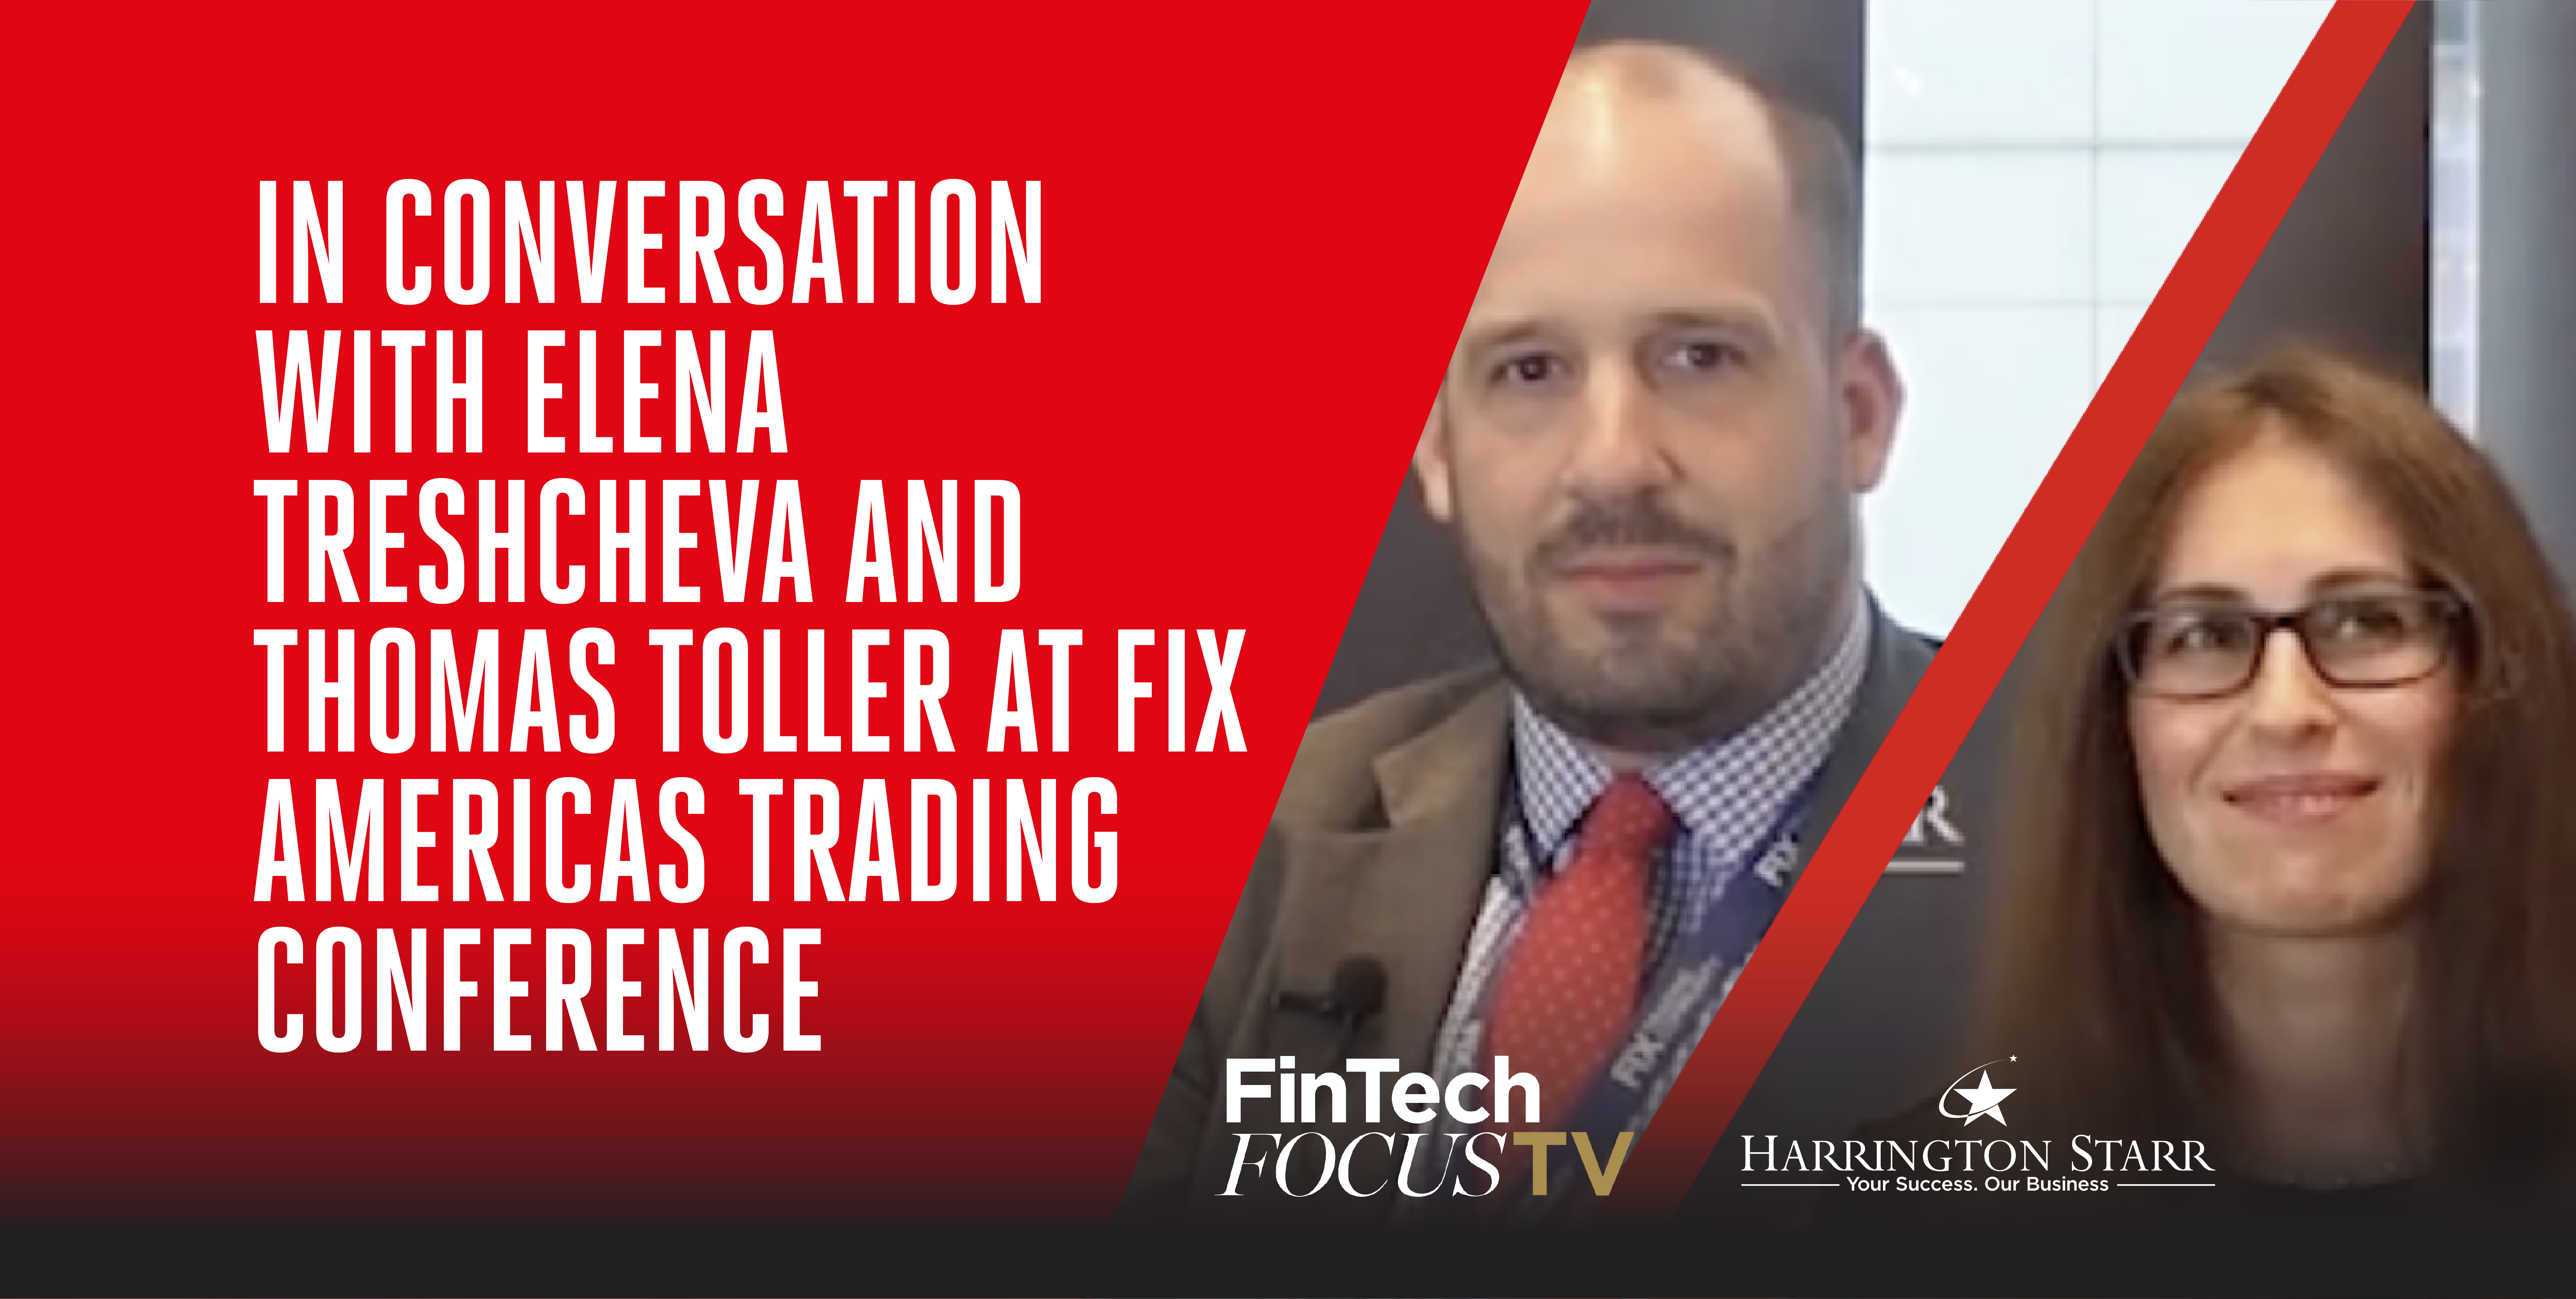 In Conversation with Elena Treshcheva and Thomas Toller at FIX Americas Trading Conference